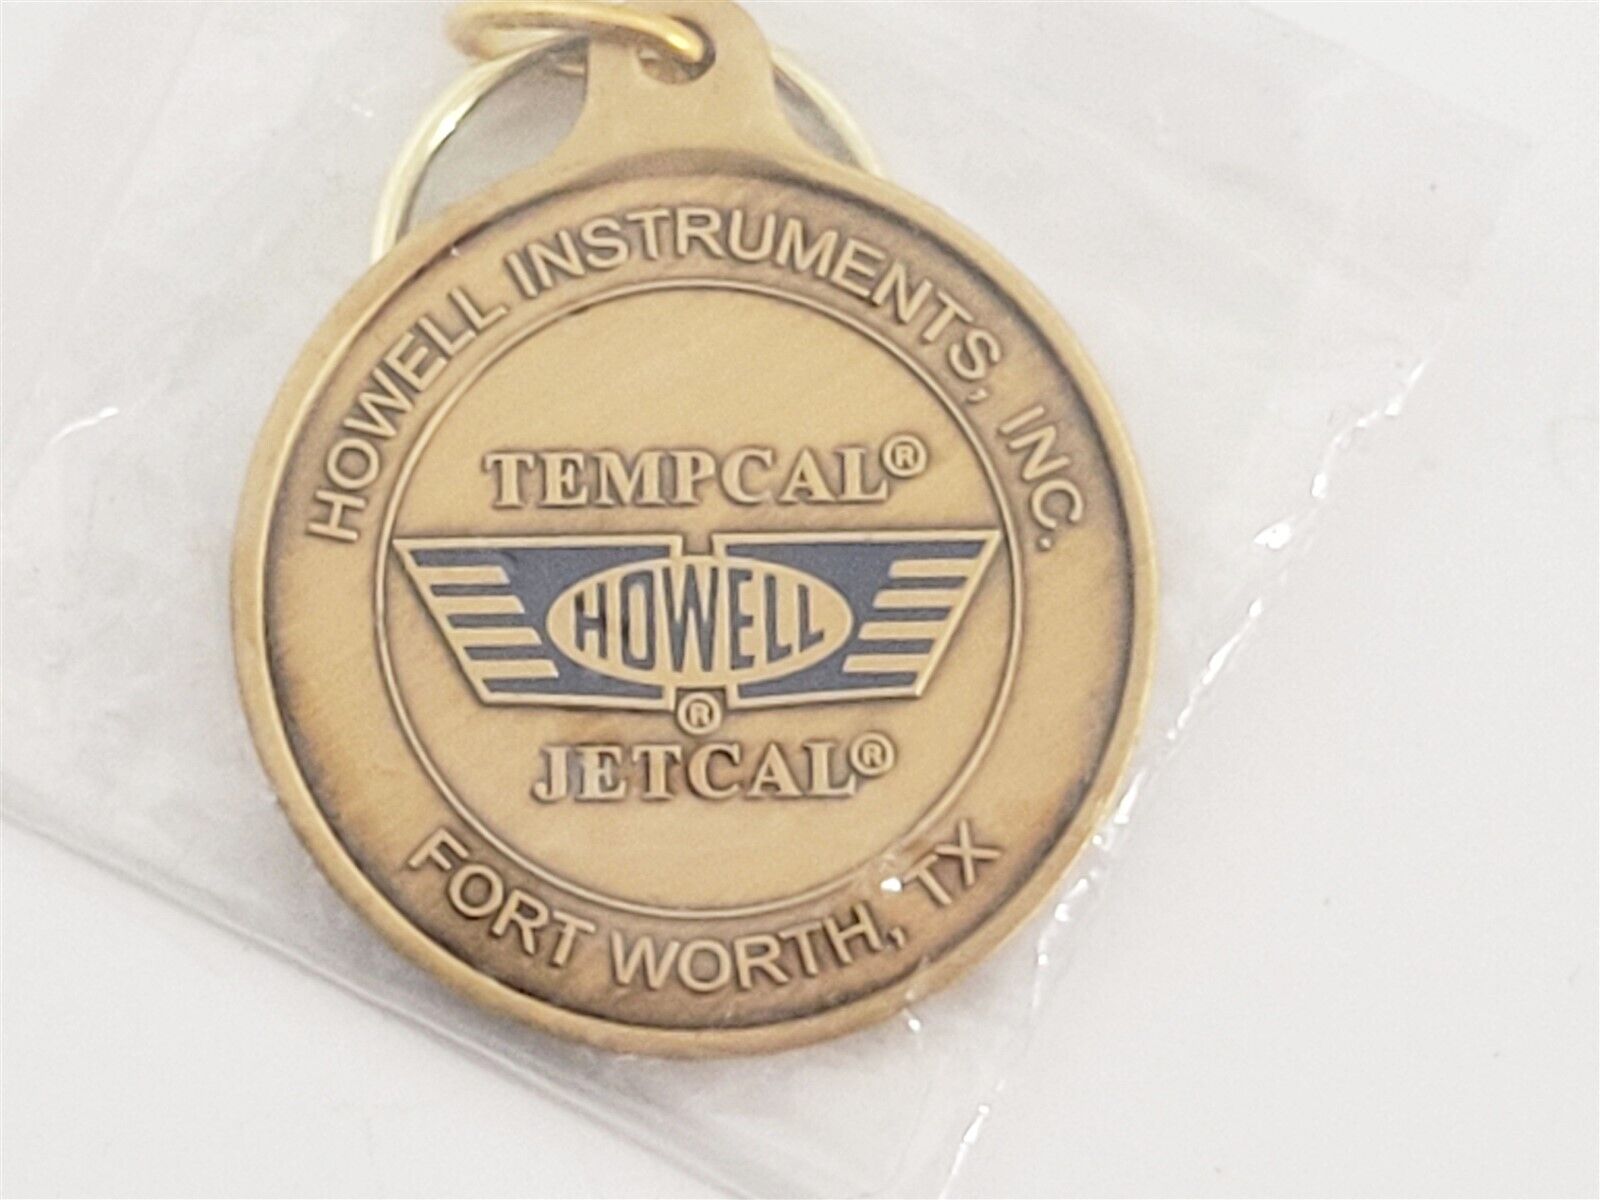 Howell Instruments Ft Worth TX / Tempcal Jetcal Keychain Military